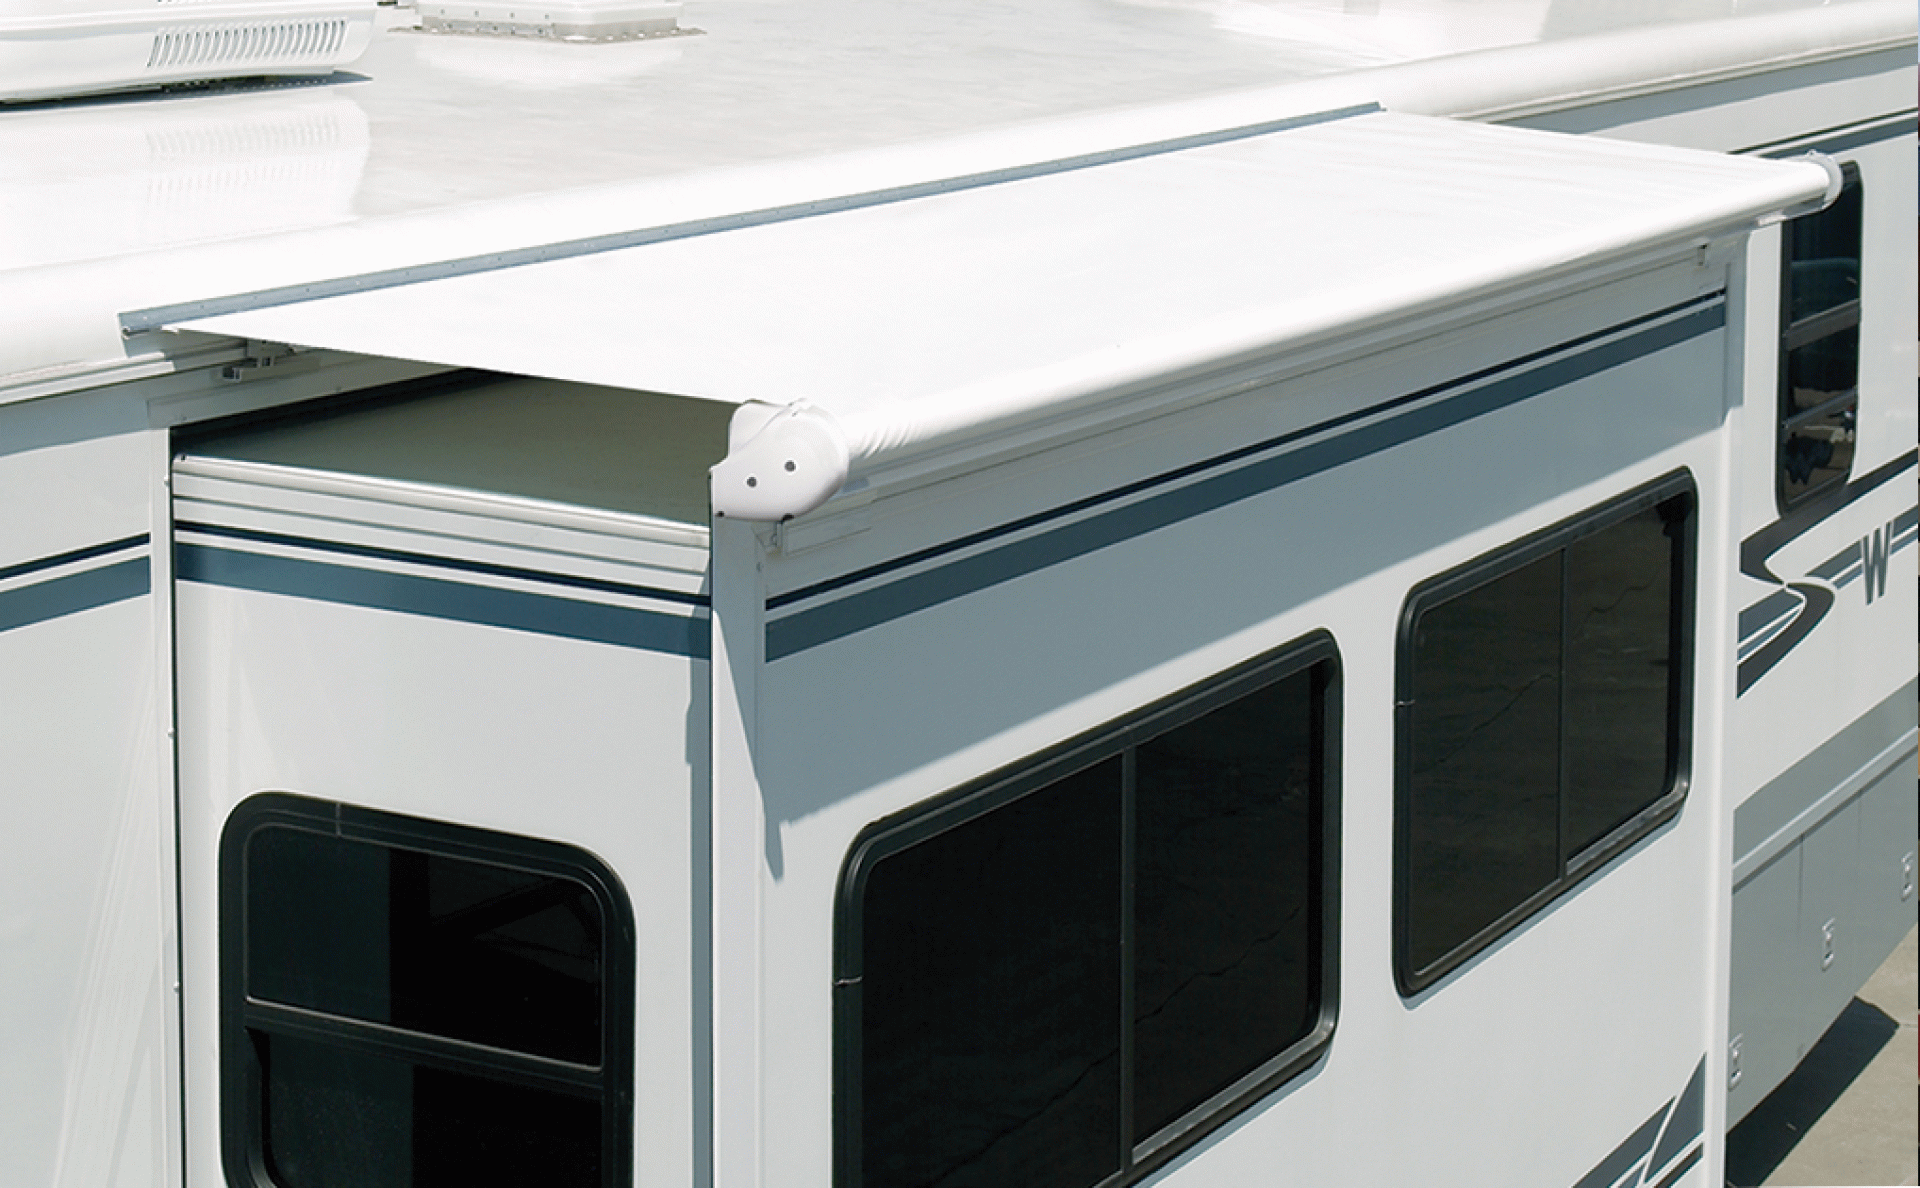 CAREFREE OF COLORADO | UQ1610025 | SIDEOUT KOVER III AWNING 158" - 161" ROOF RANGE WHITE VINYL FABRIC & DEFLECTOR